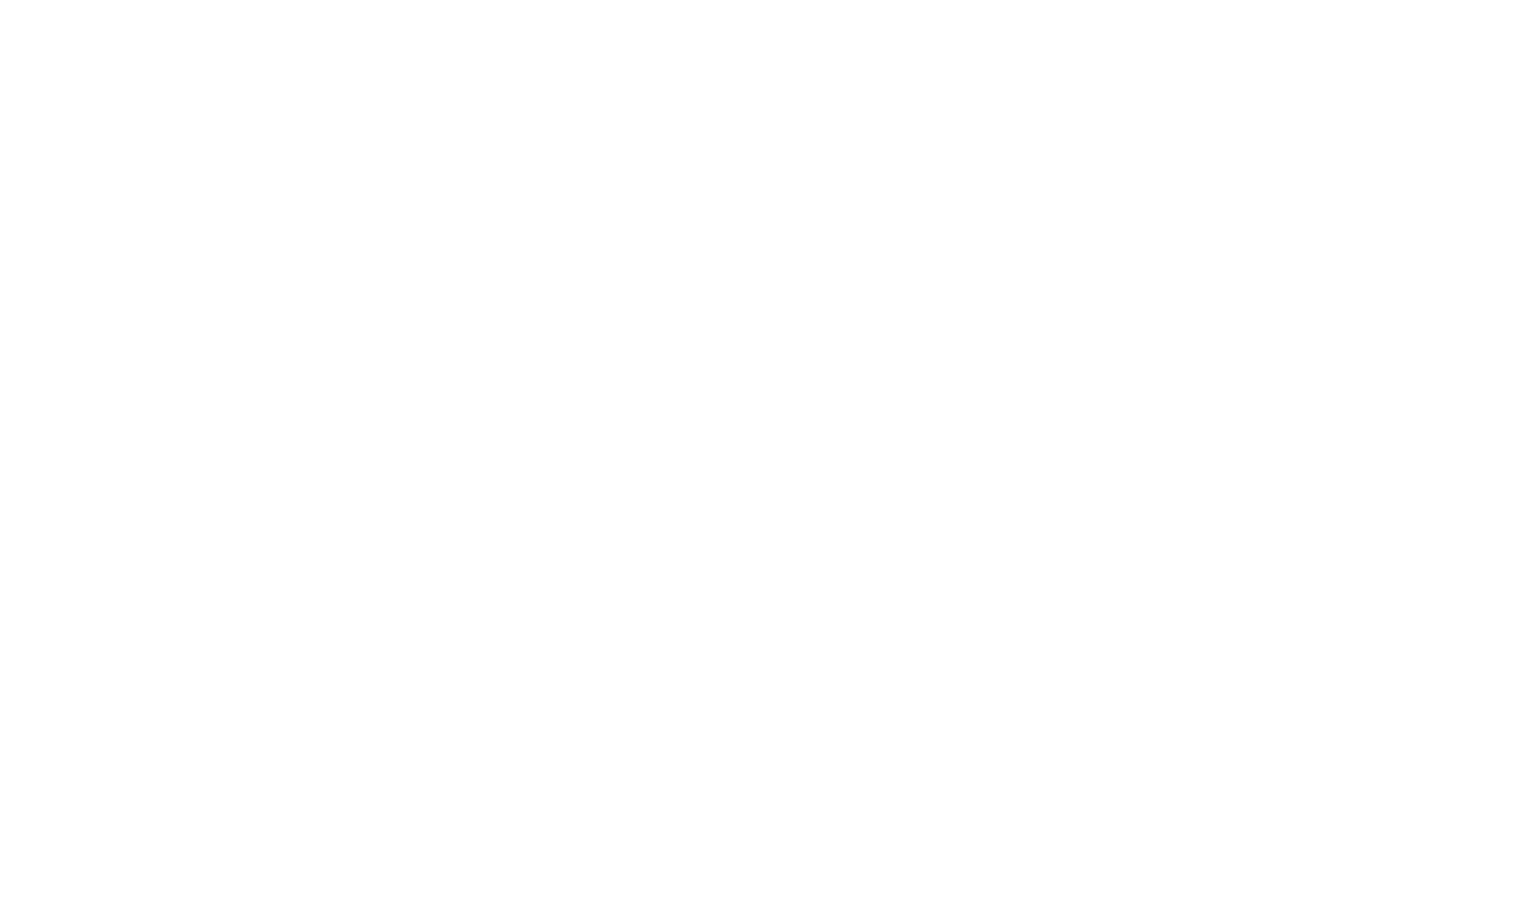 Combine IPv6 enhanced to promote digital and network innovation